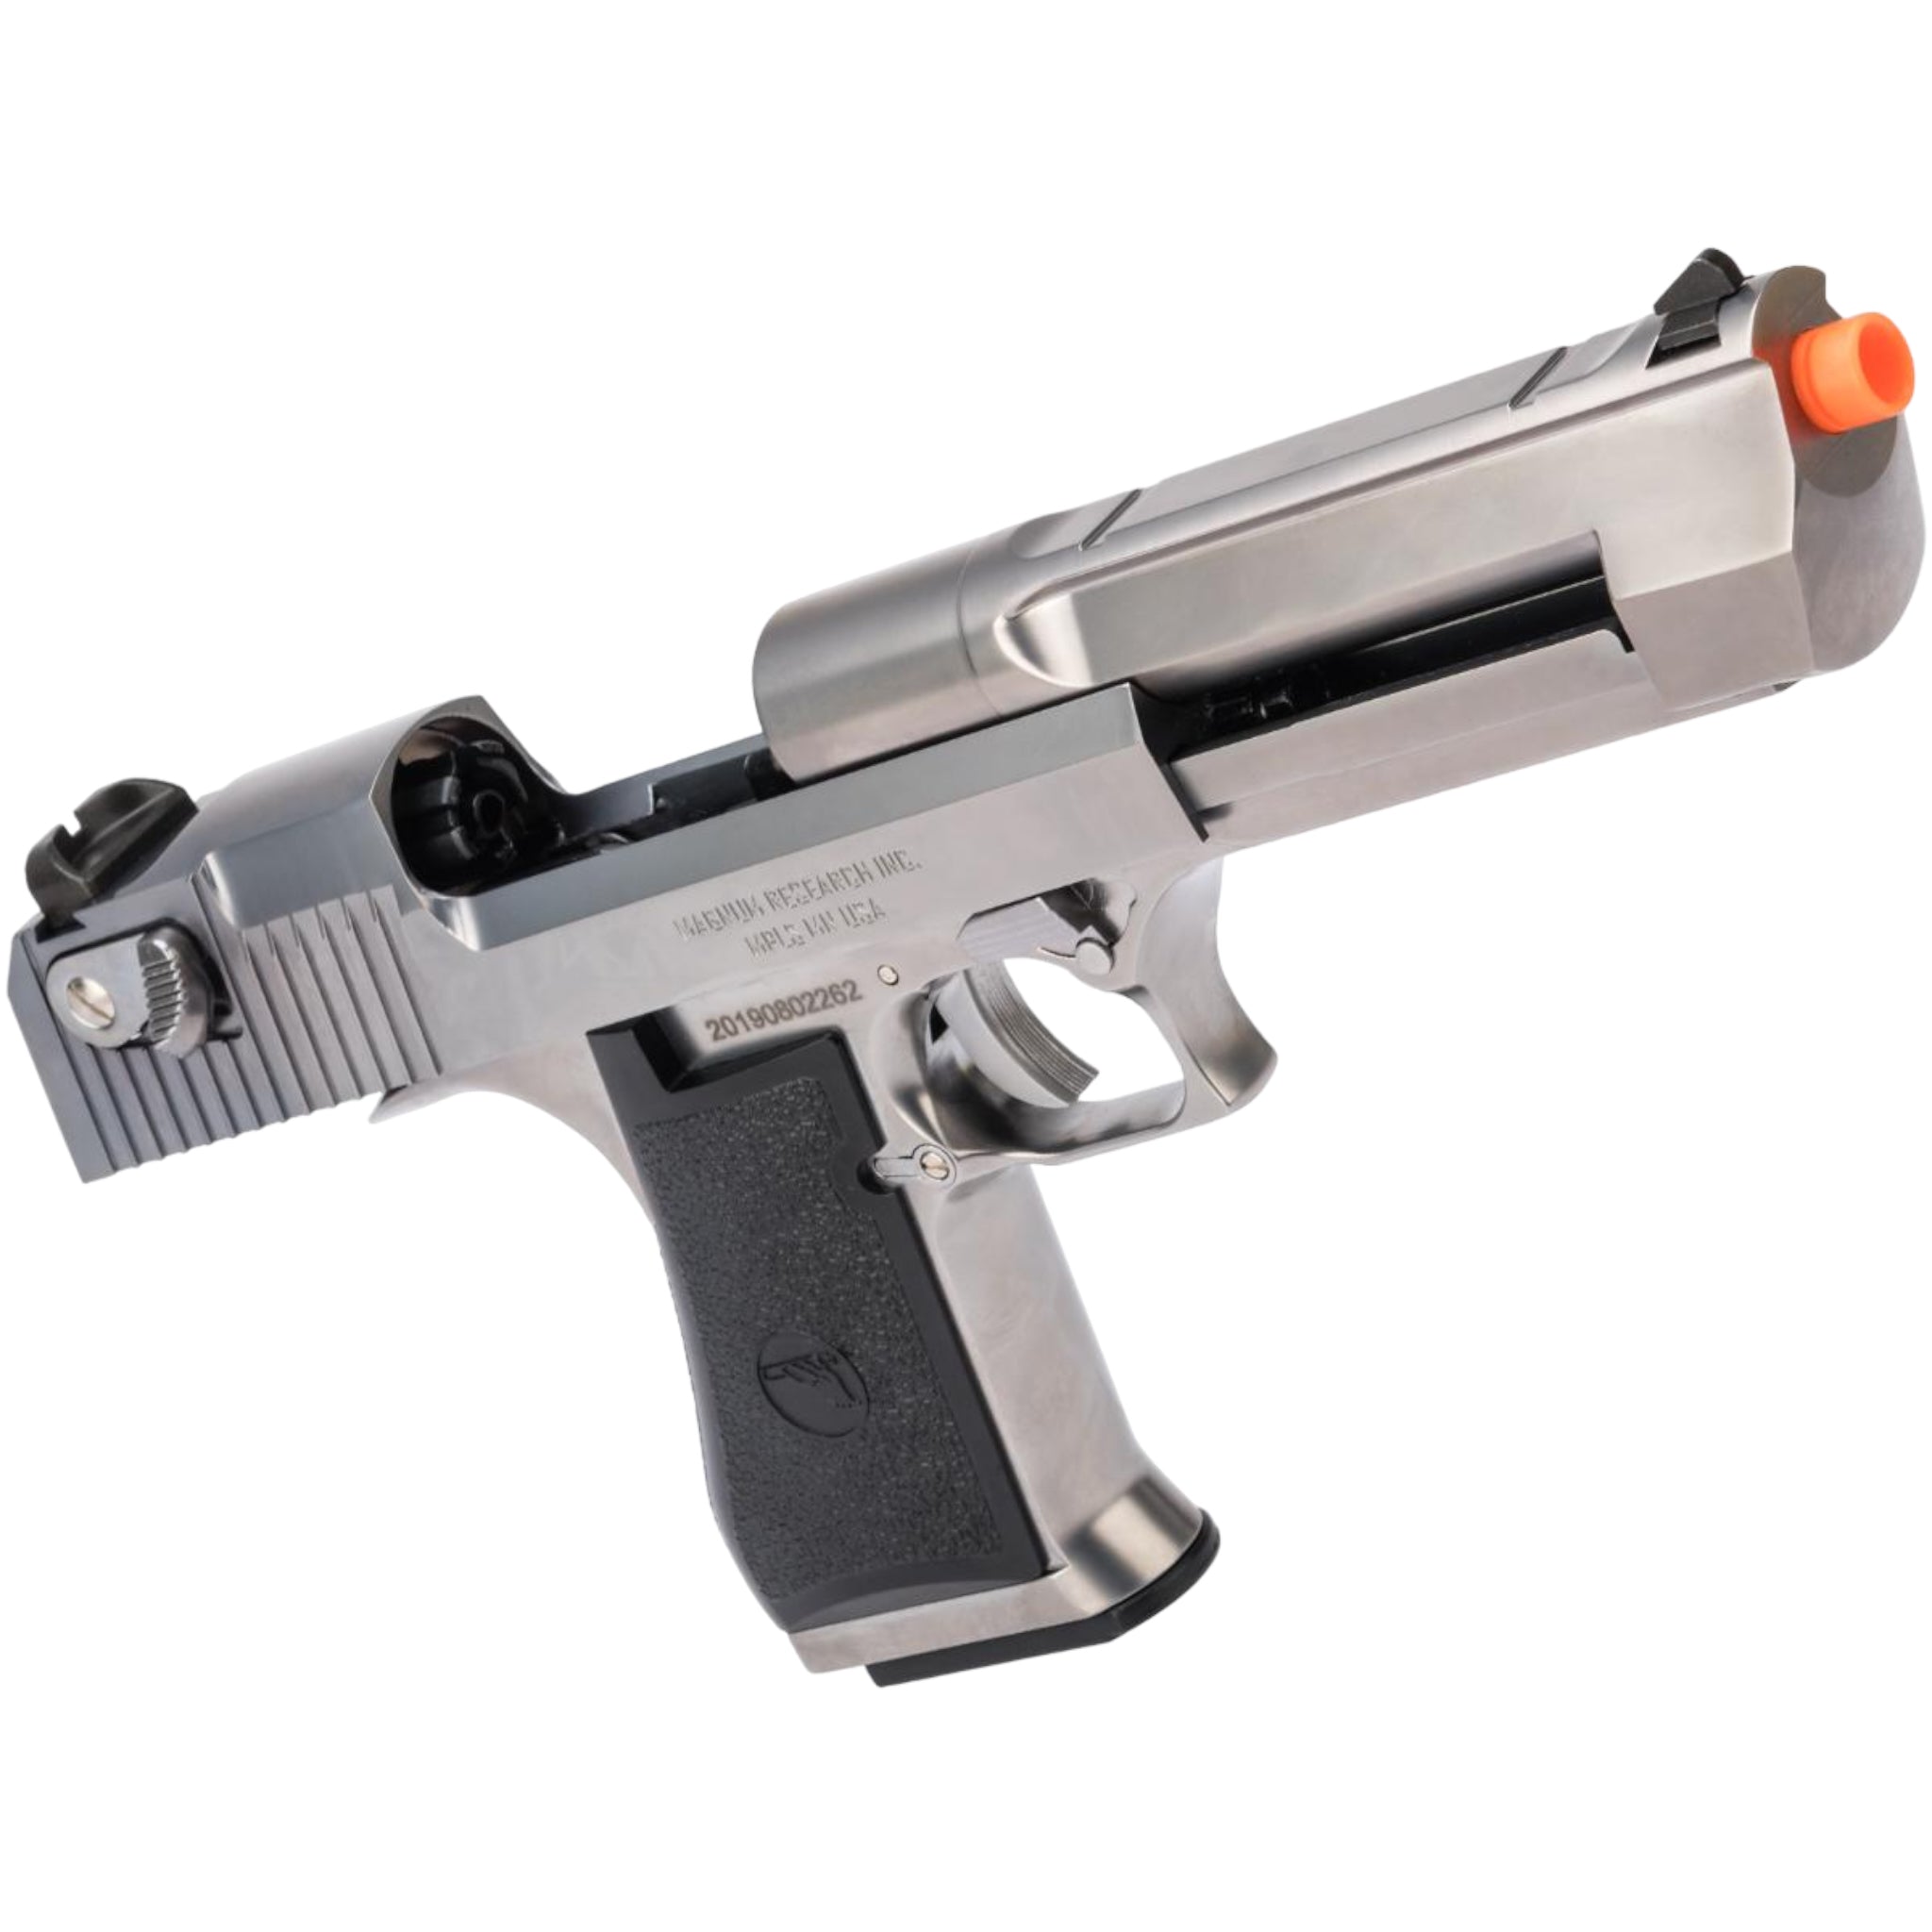 WE-Tech Desert Eagle .50 AE Full Metal Gas Blowback Airsoft Pistol by Cybergun CO2 - ssairsoft.com